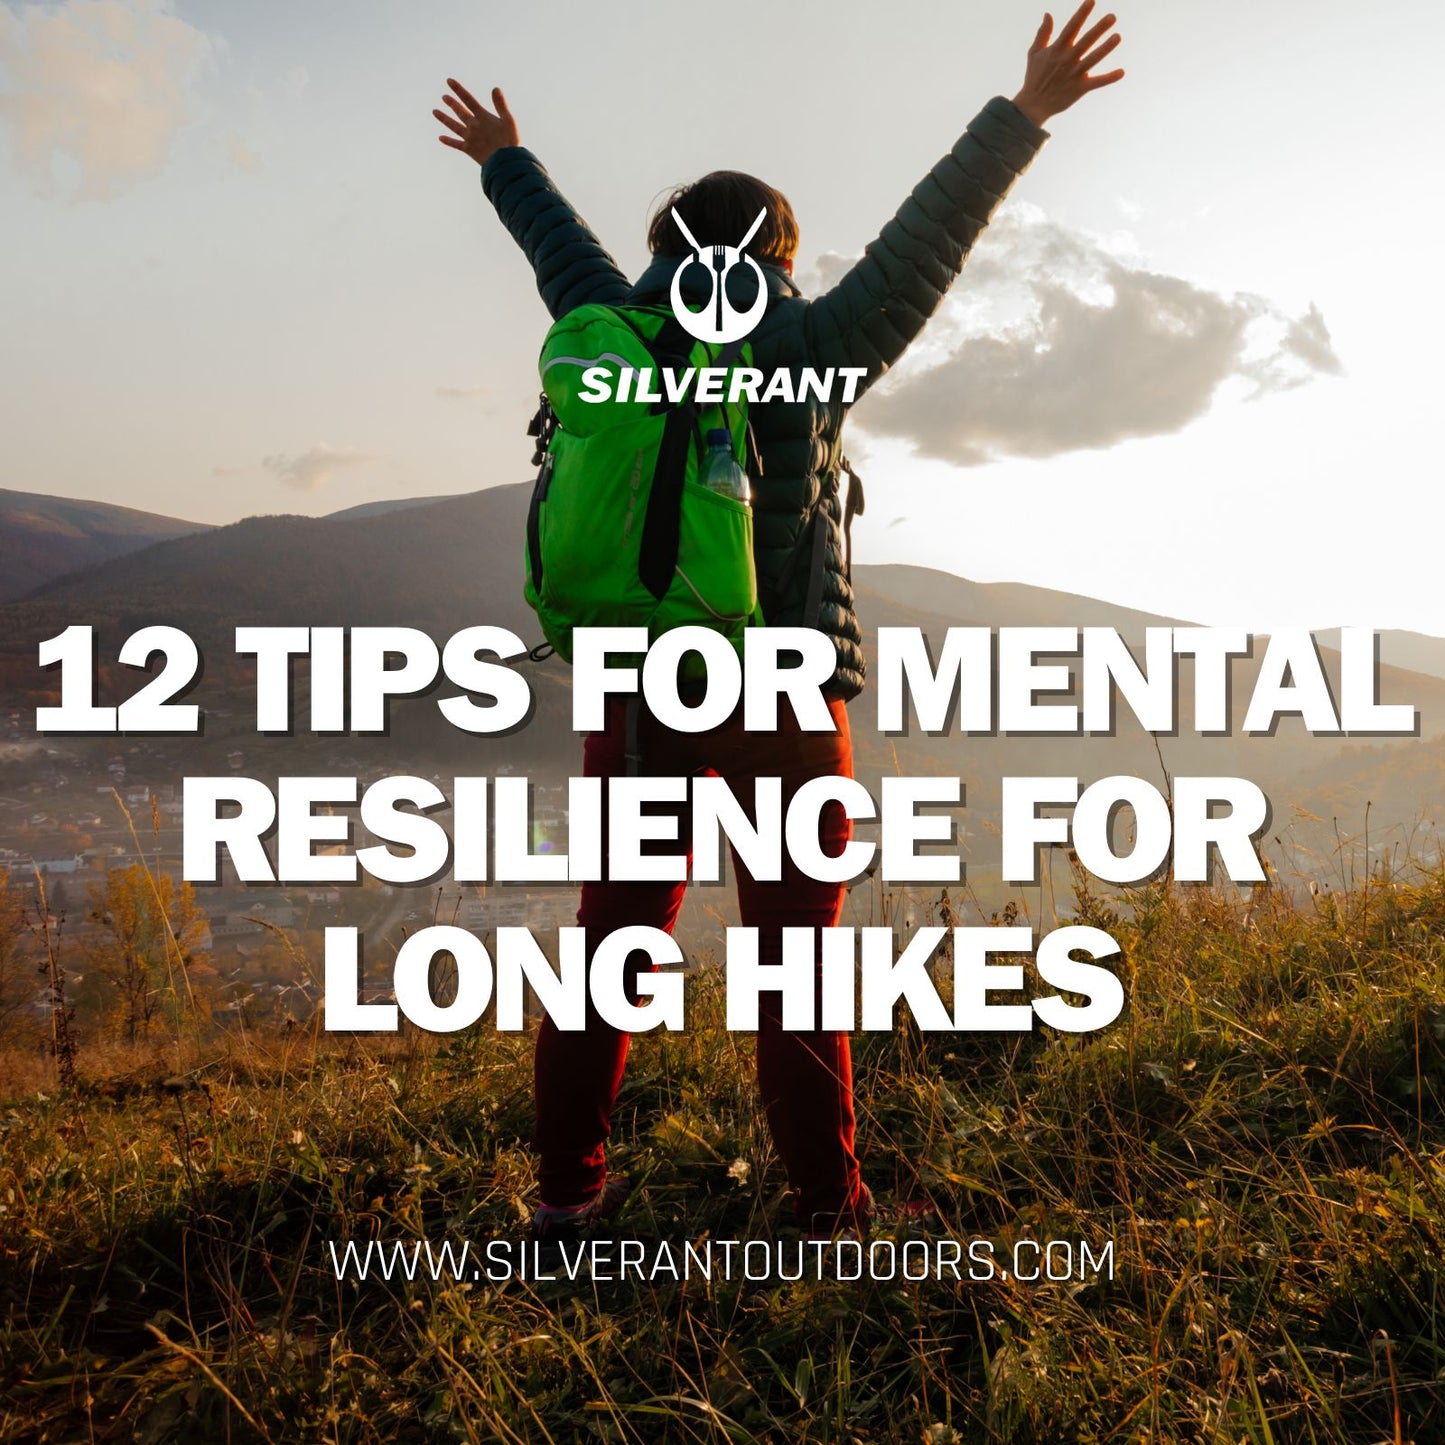 12 Tips for Mental Preparation and Resilience for Extended Hikes